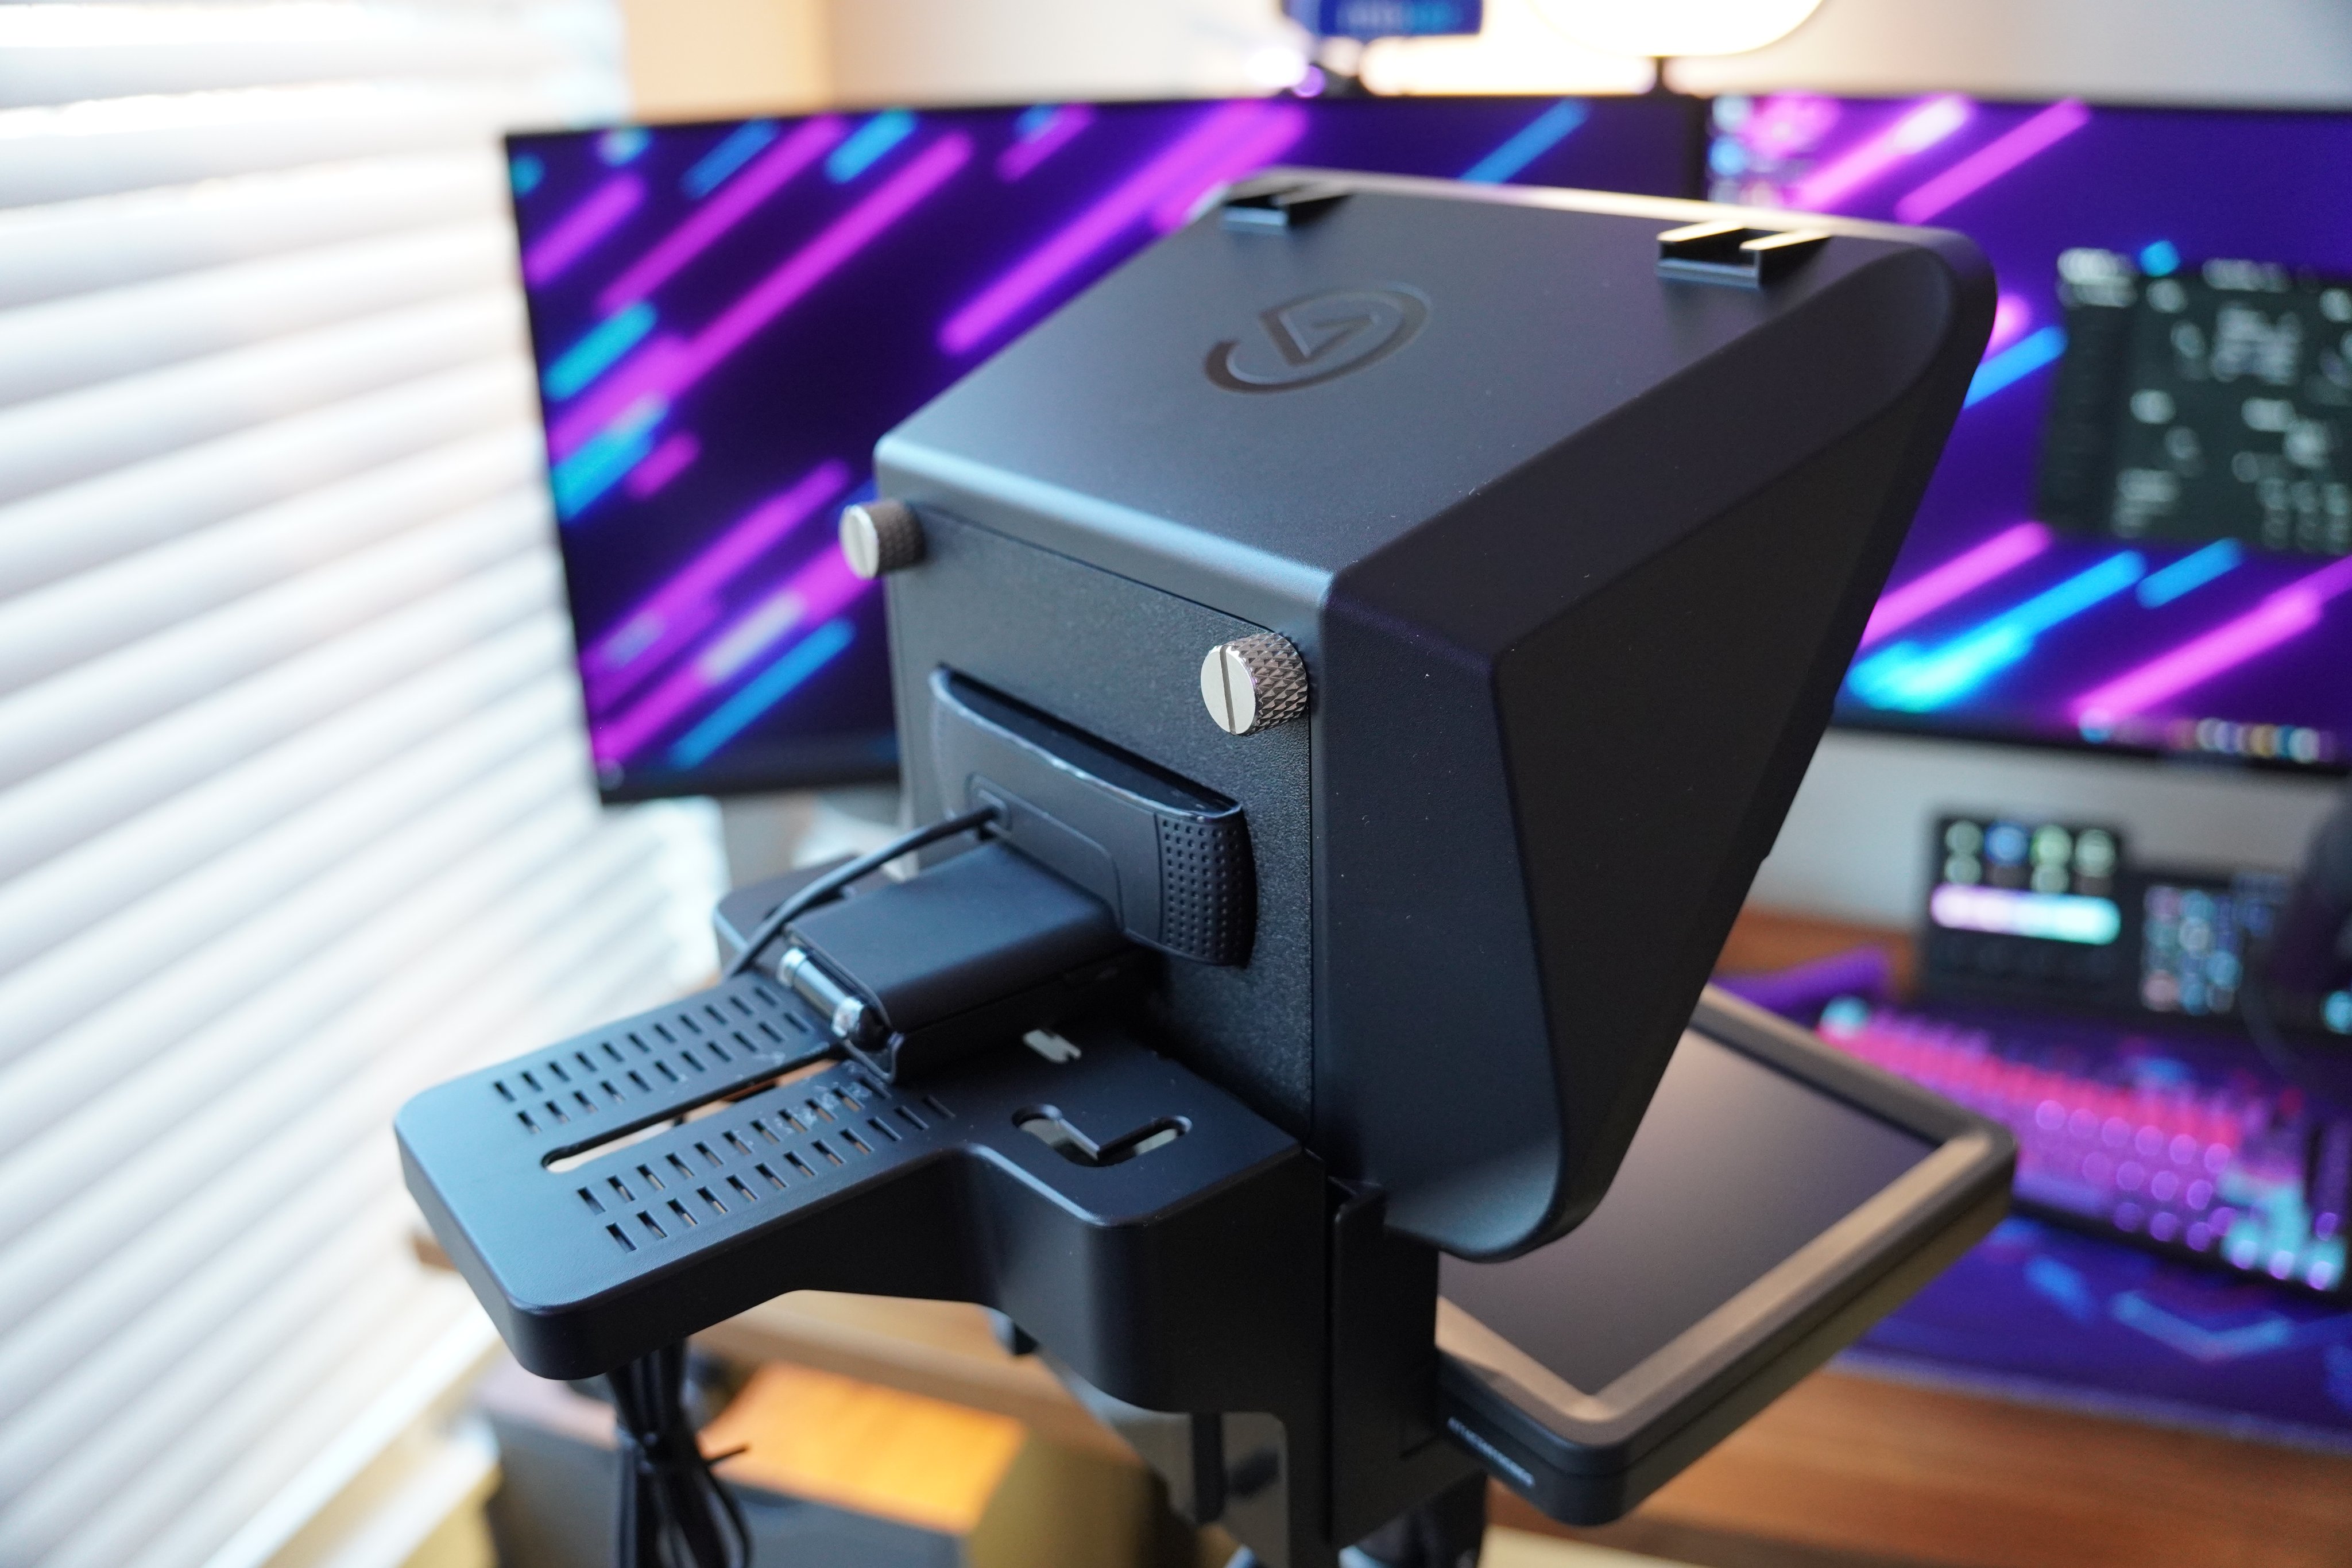 Elgato Unveils First-of-its-Kind Teleprompter